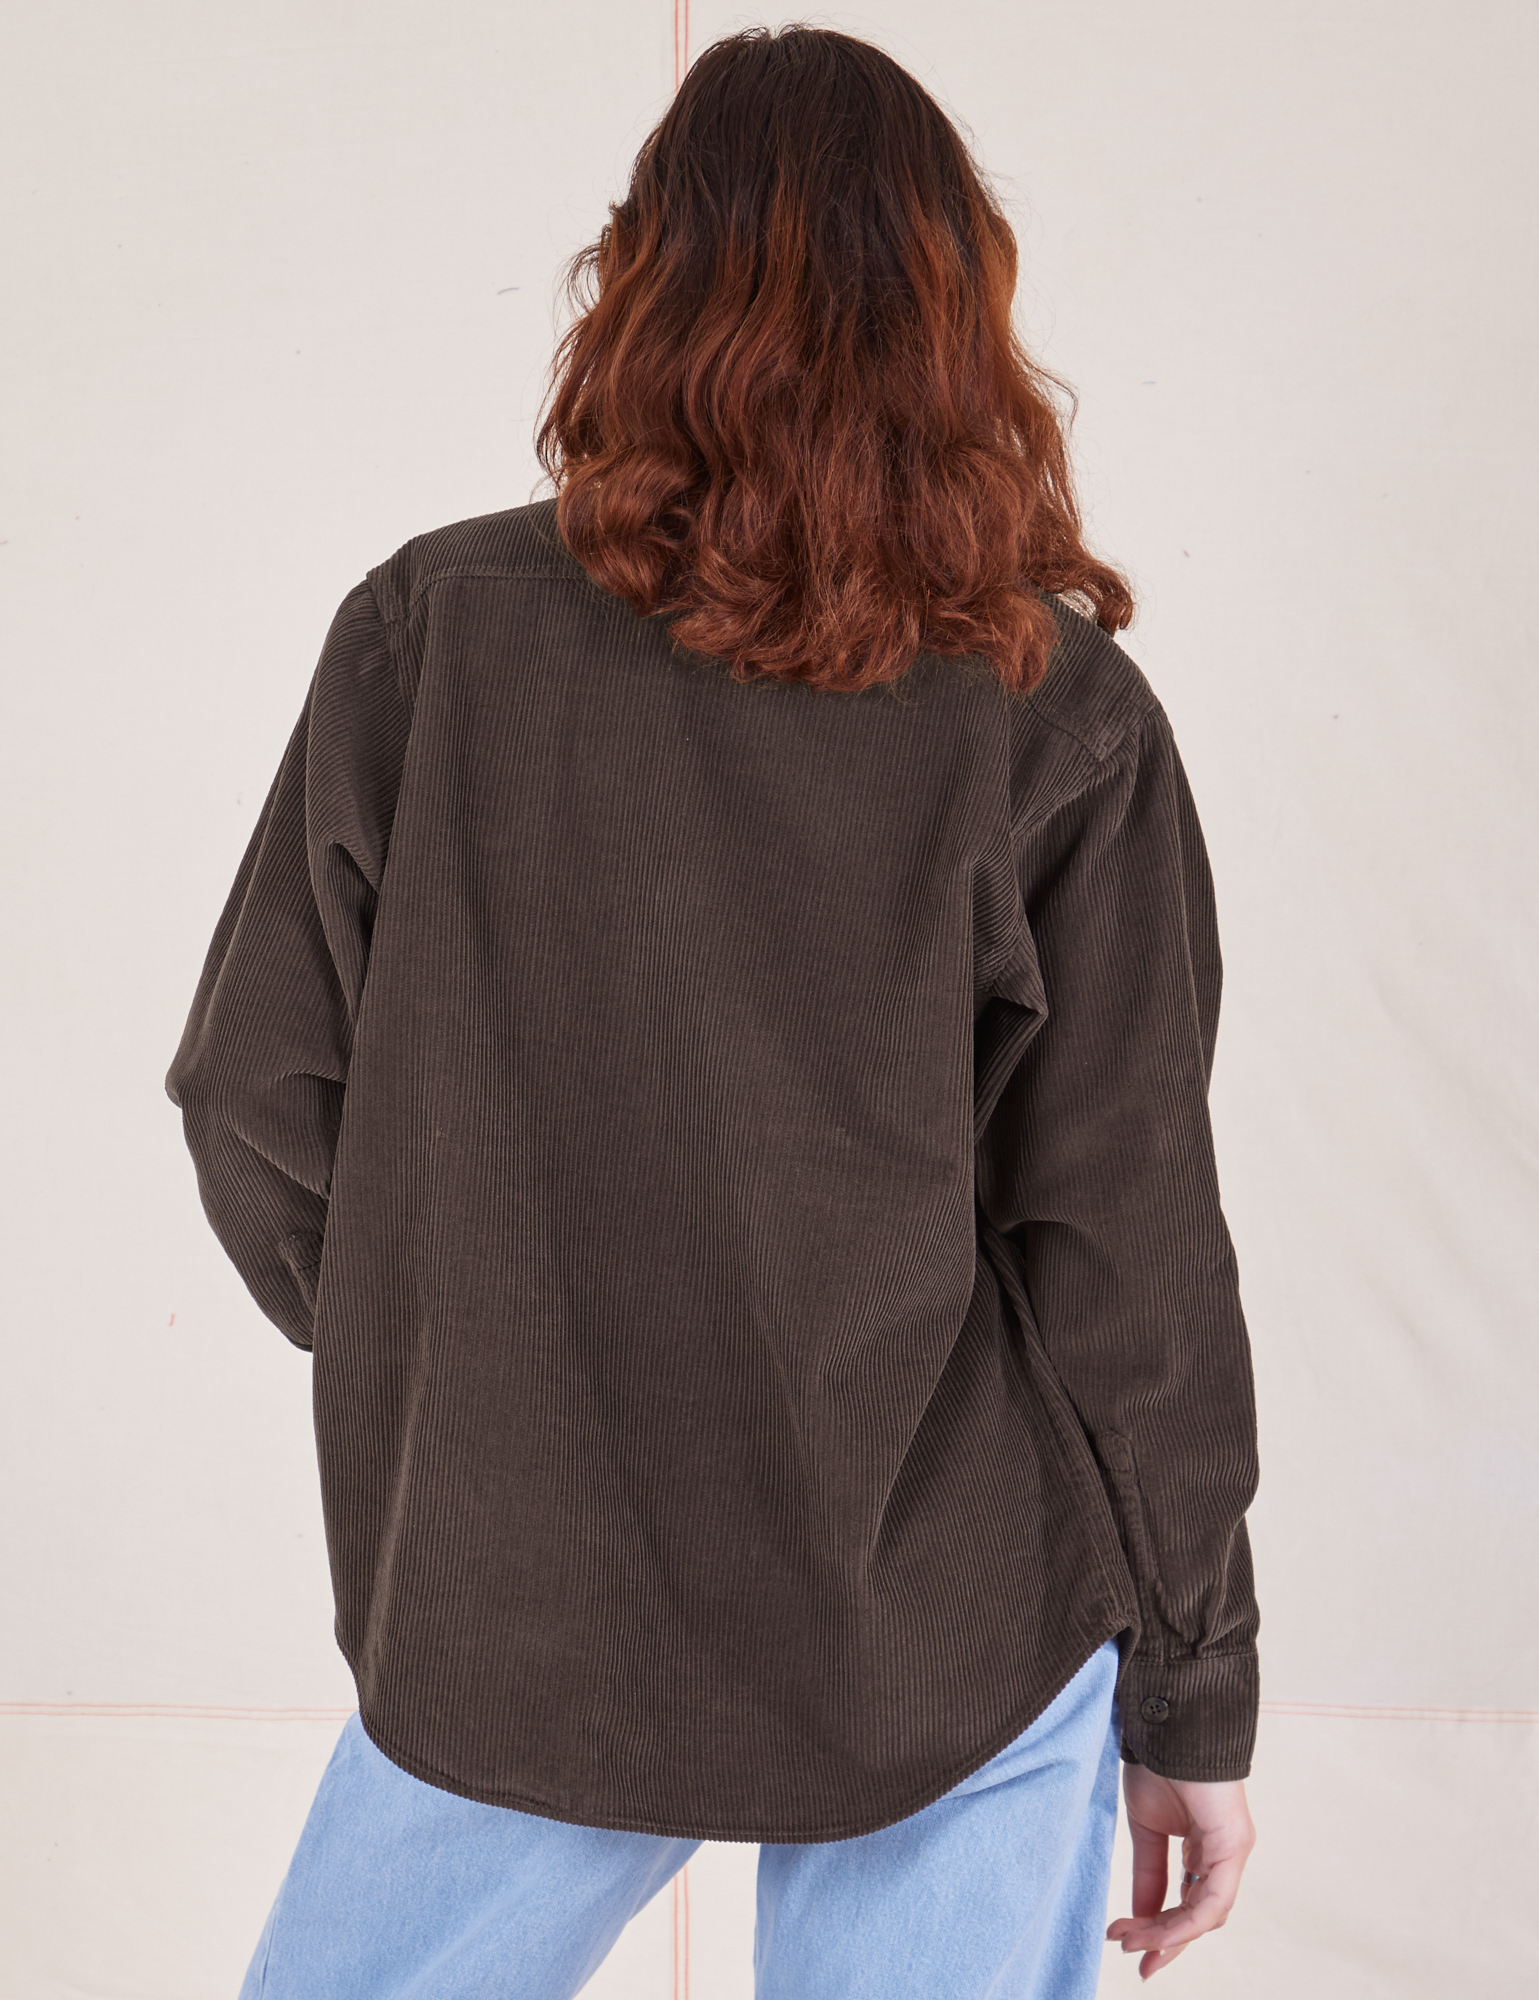 Corduroy Overshirt in Espresso Brown back view on Alex